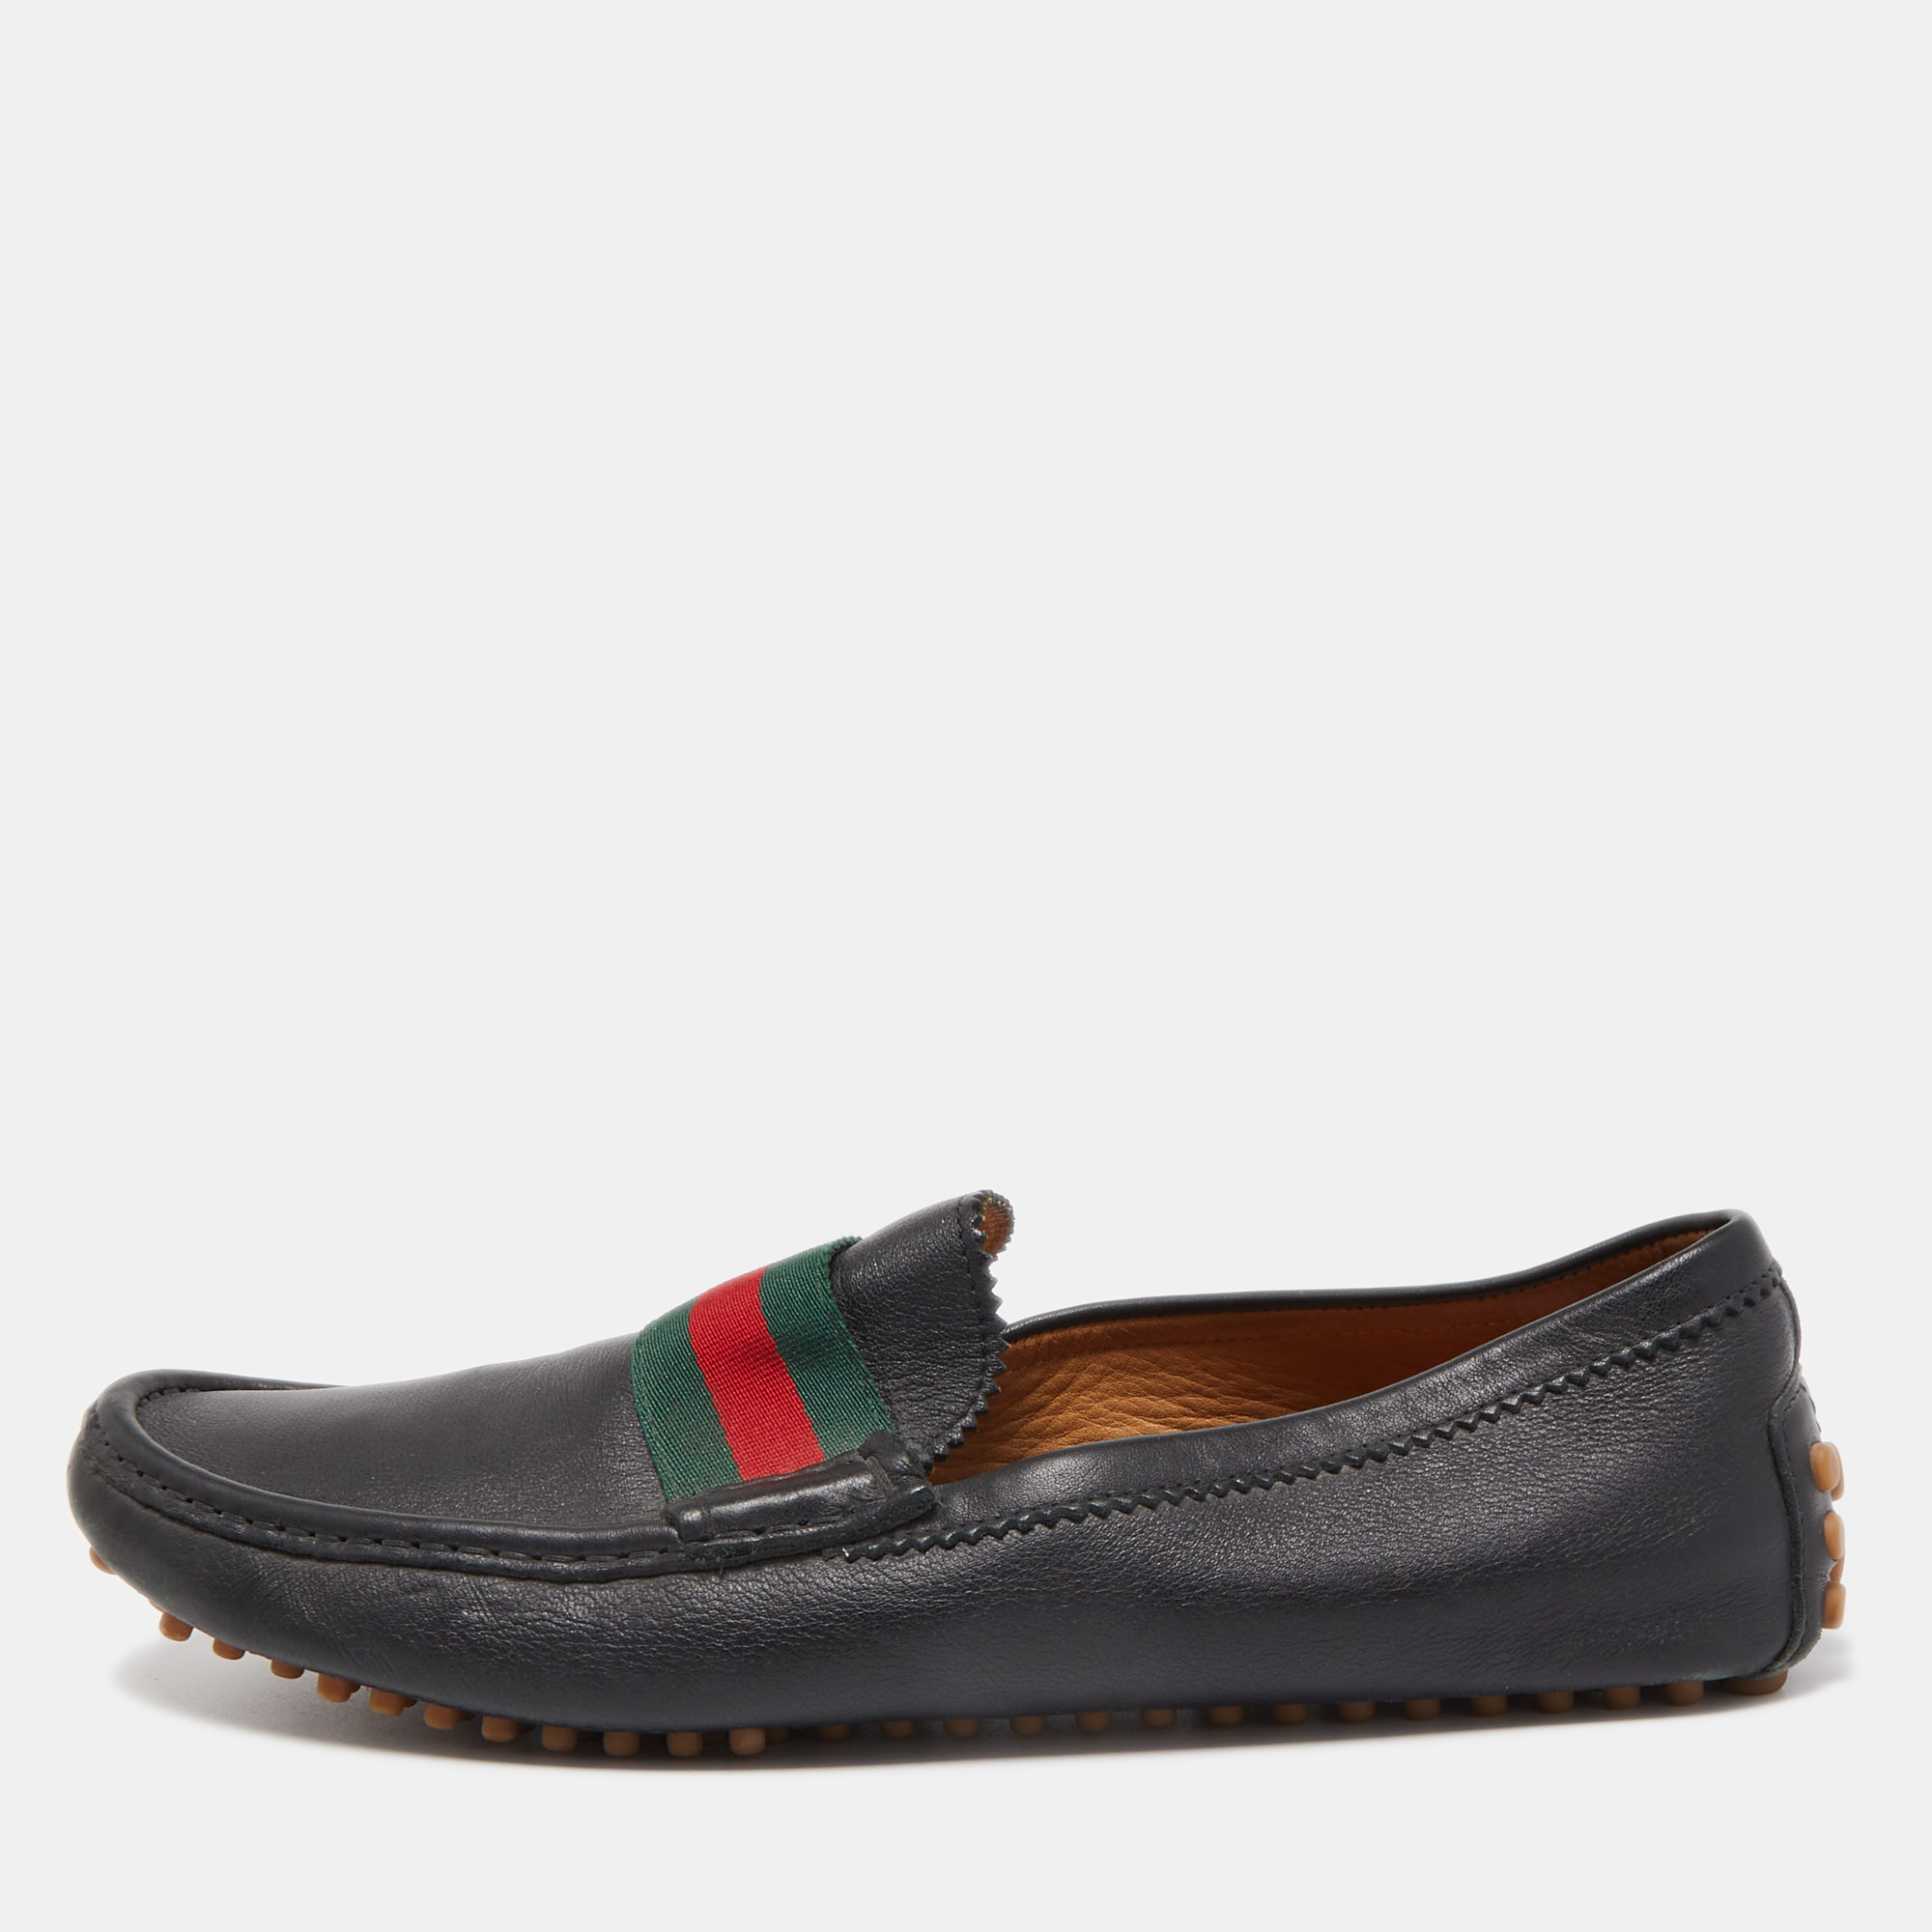 Gucci Black Leather Web Slip On Loafers Size 45